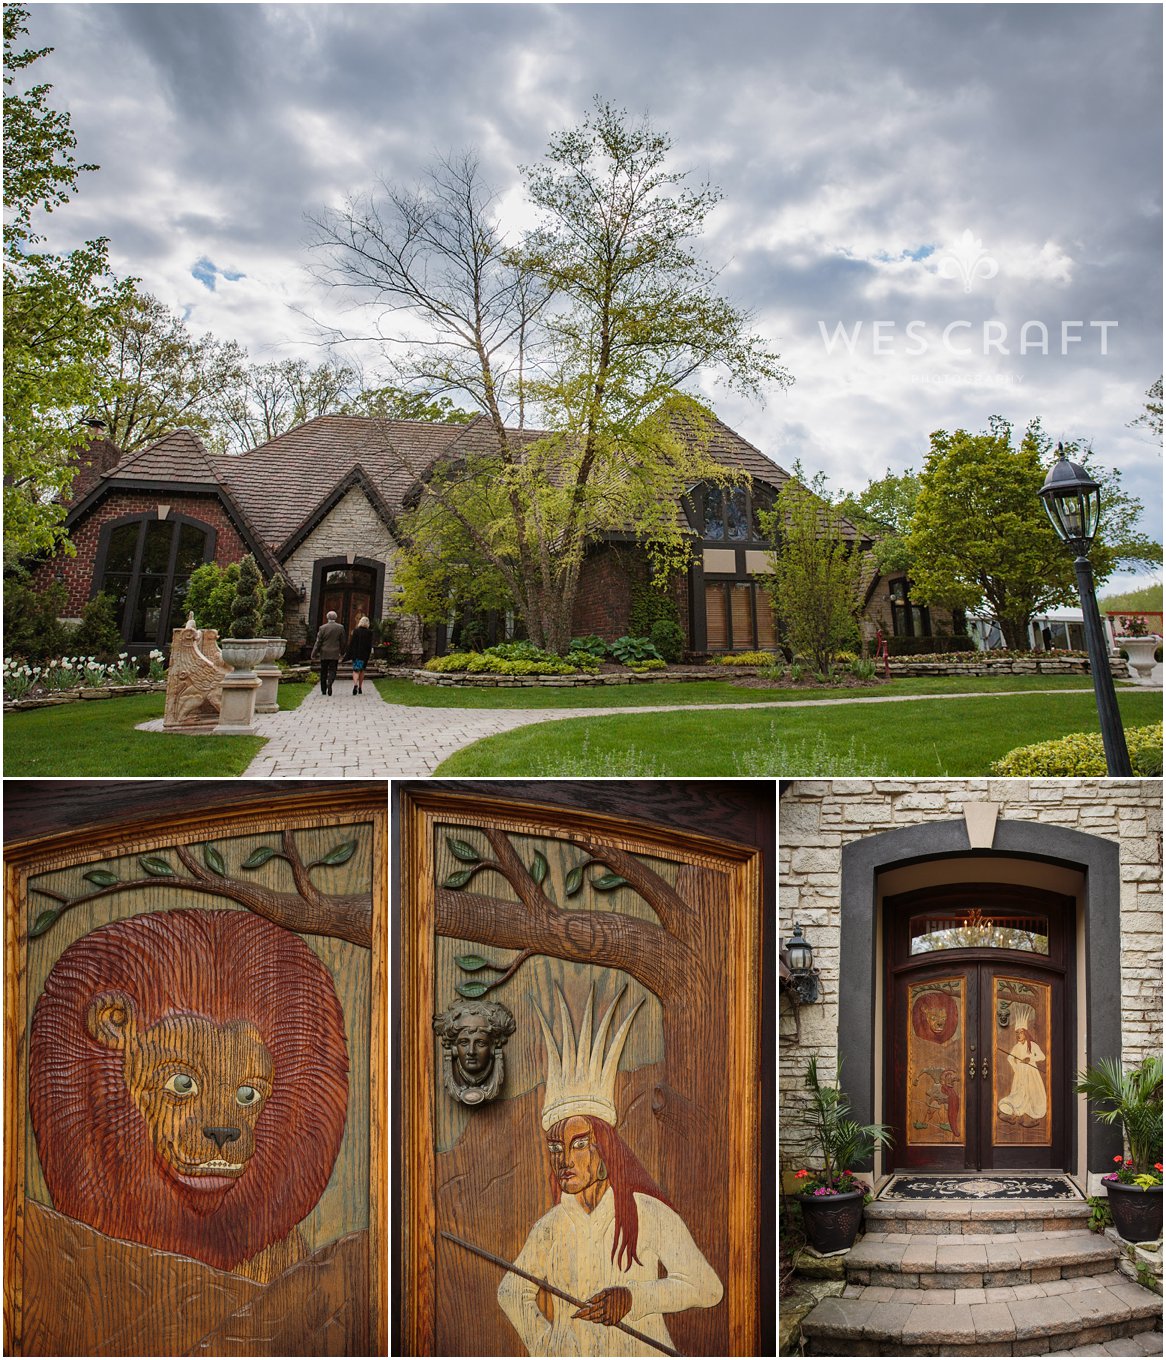 Photograph of the Monte Bello Estate's Chronicles of Narnia themed carved doors.